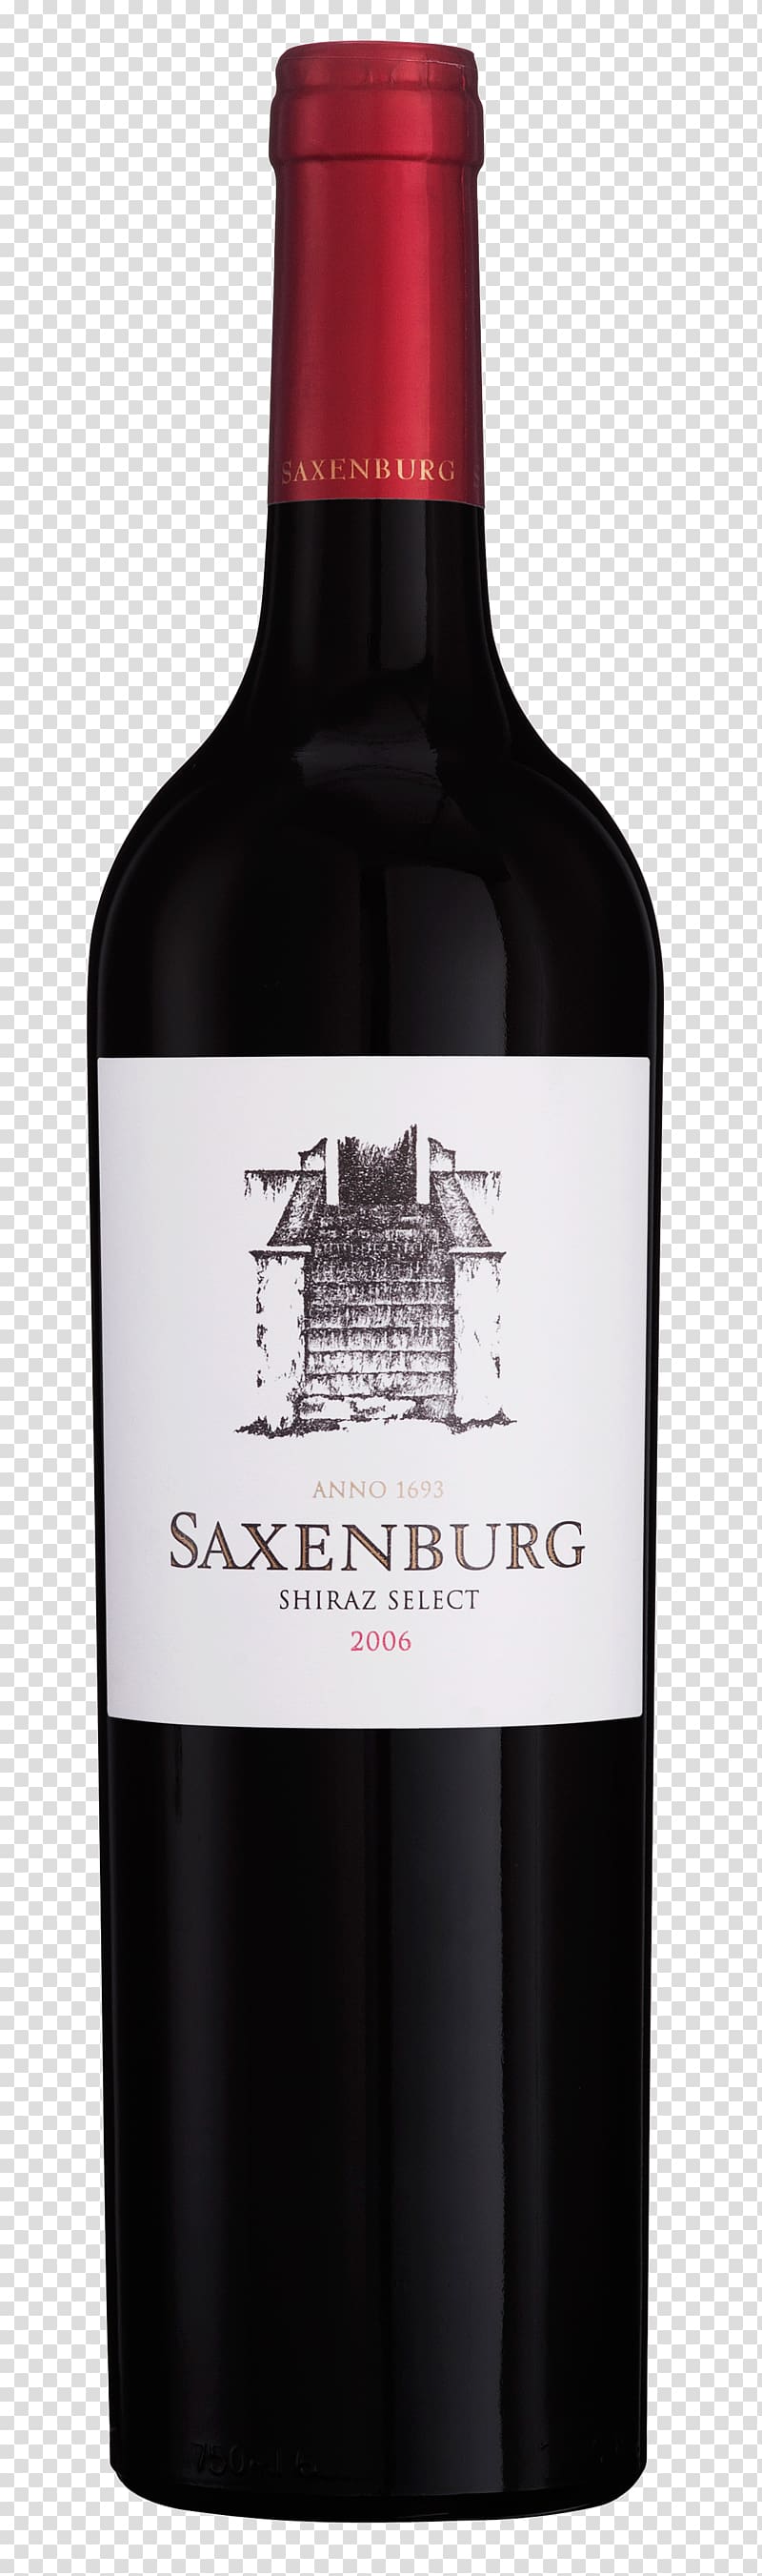 Shiraz Red Wine Stellenbosch South African wine, names wine grapes transparent background PNG clipart